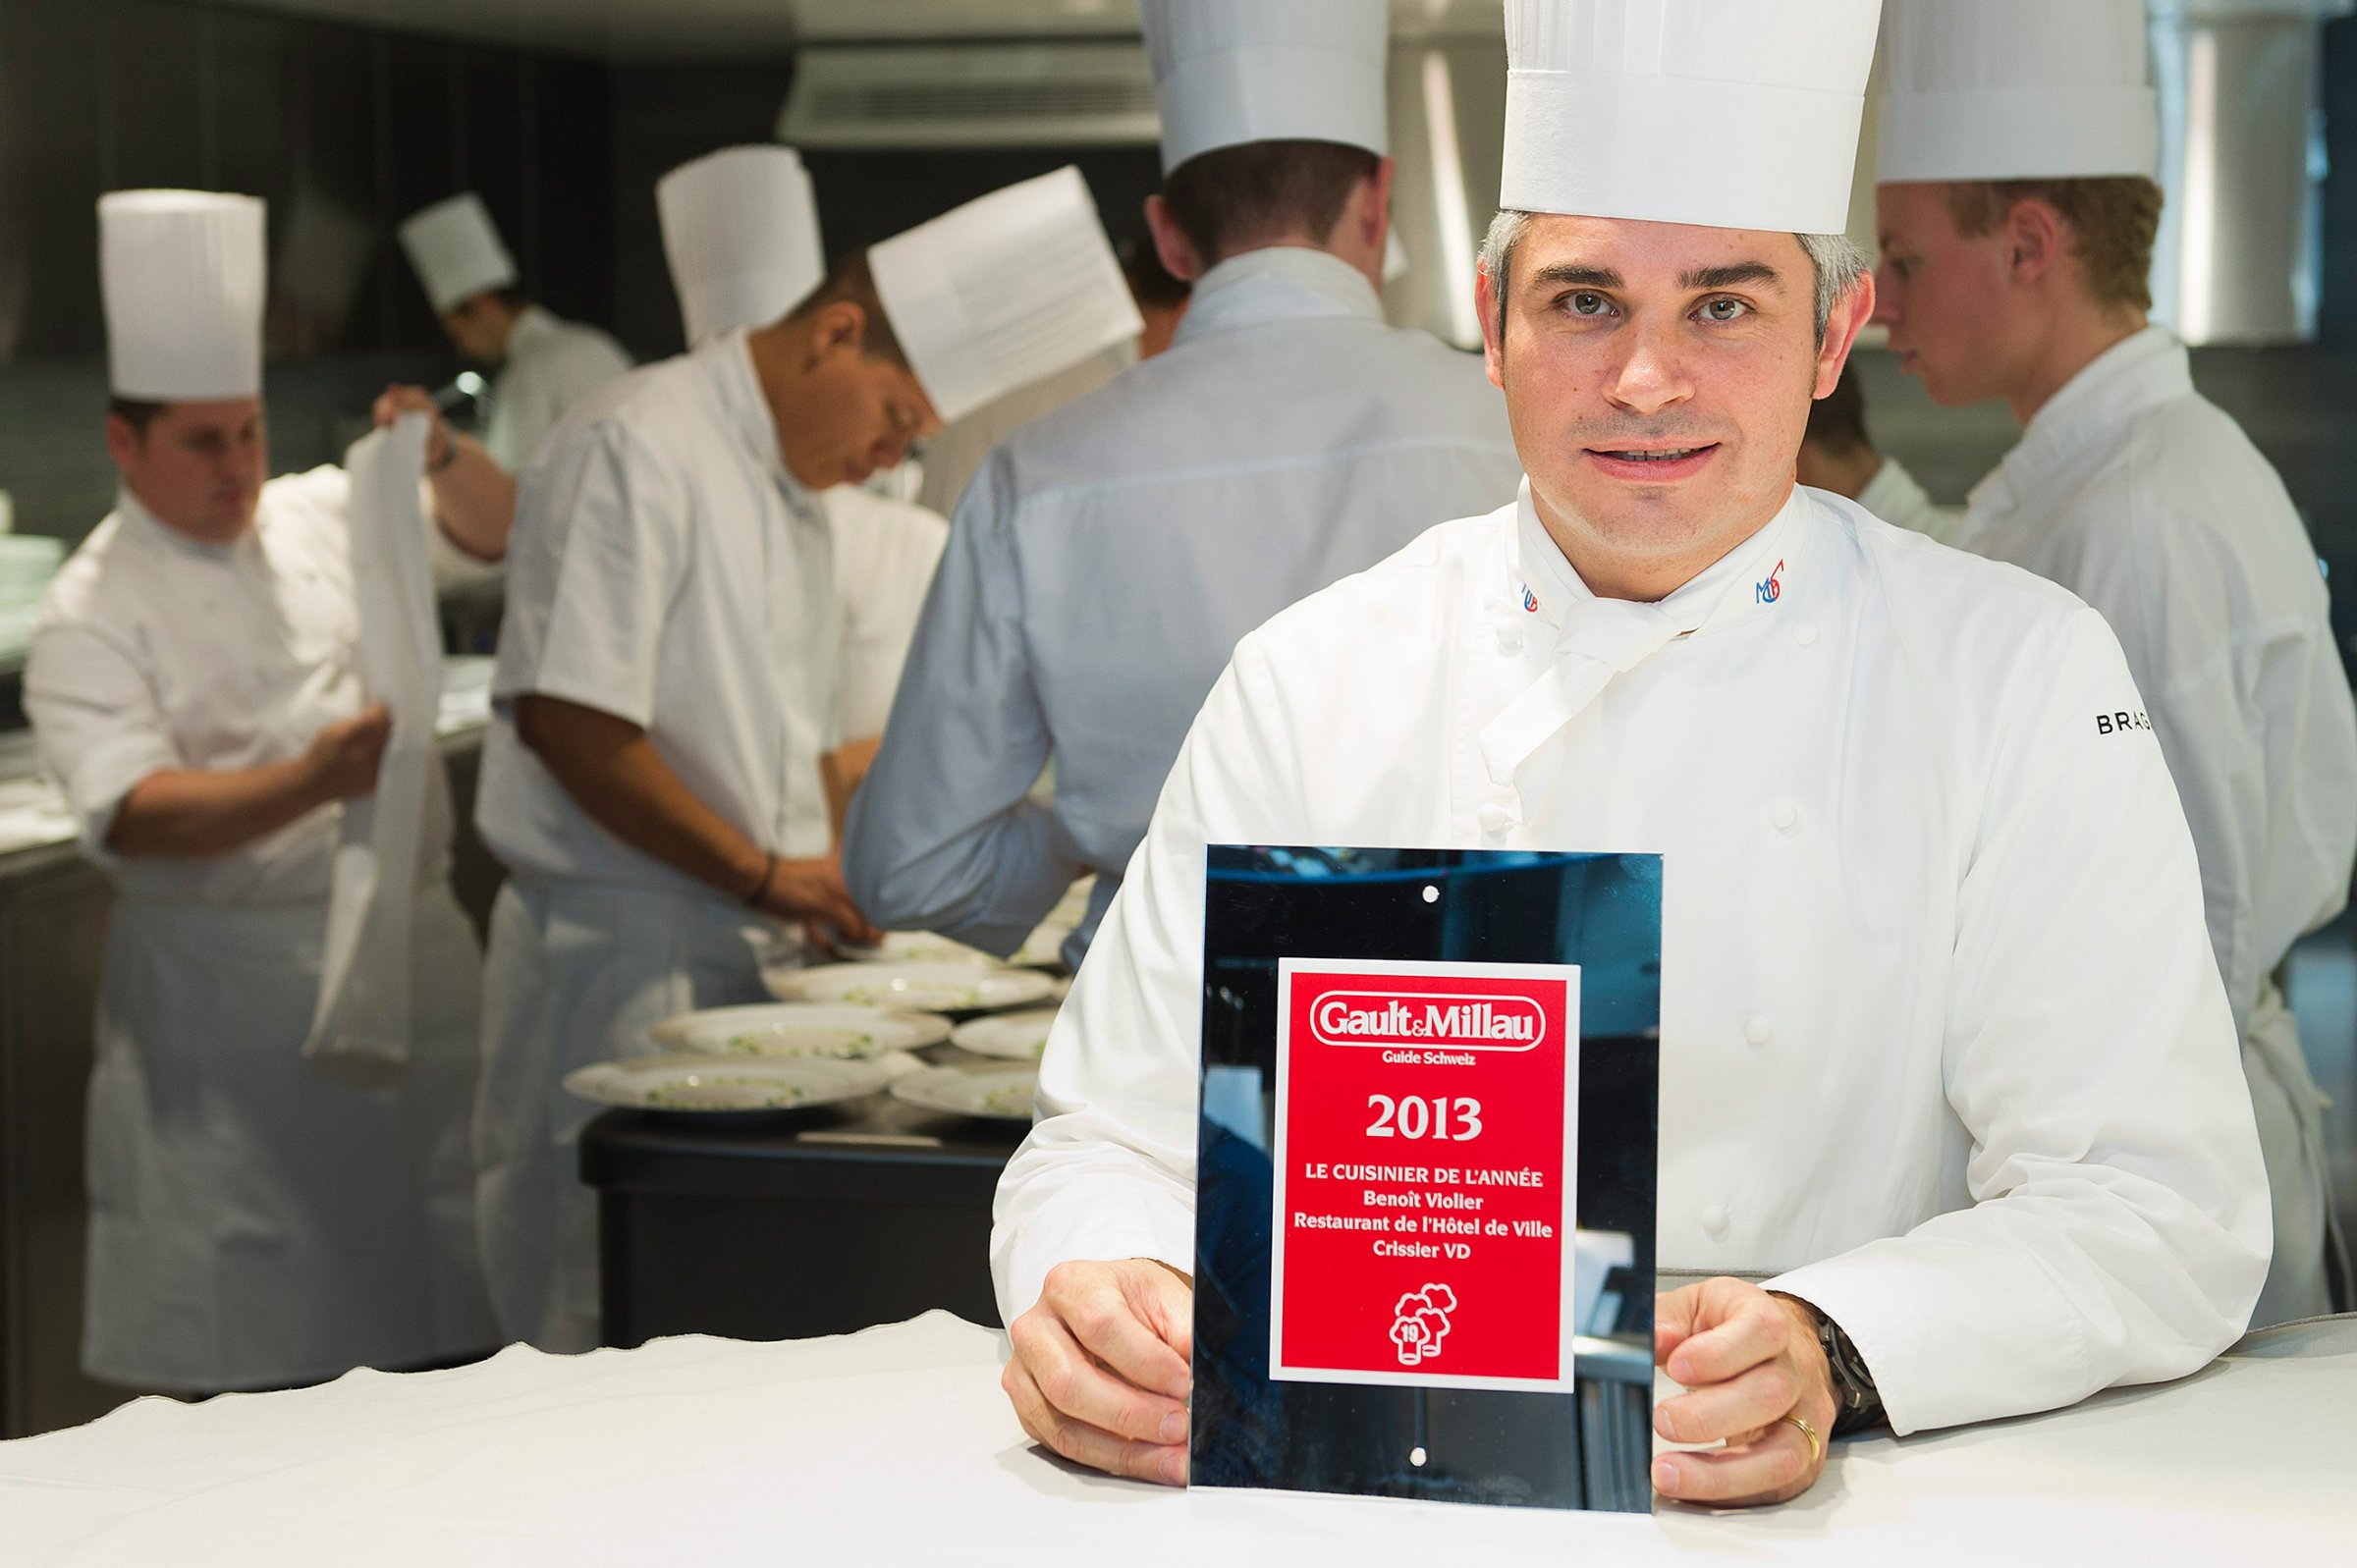 Benoit Violier poses with the certificate as Chef of the Year in his kitchen in the Hotel de Ville in Crissier, Switzerland, Oct. 8, 2012.